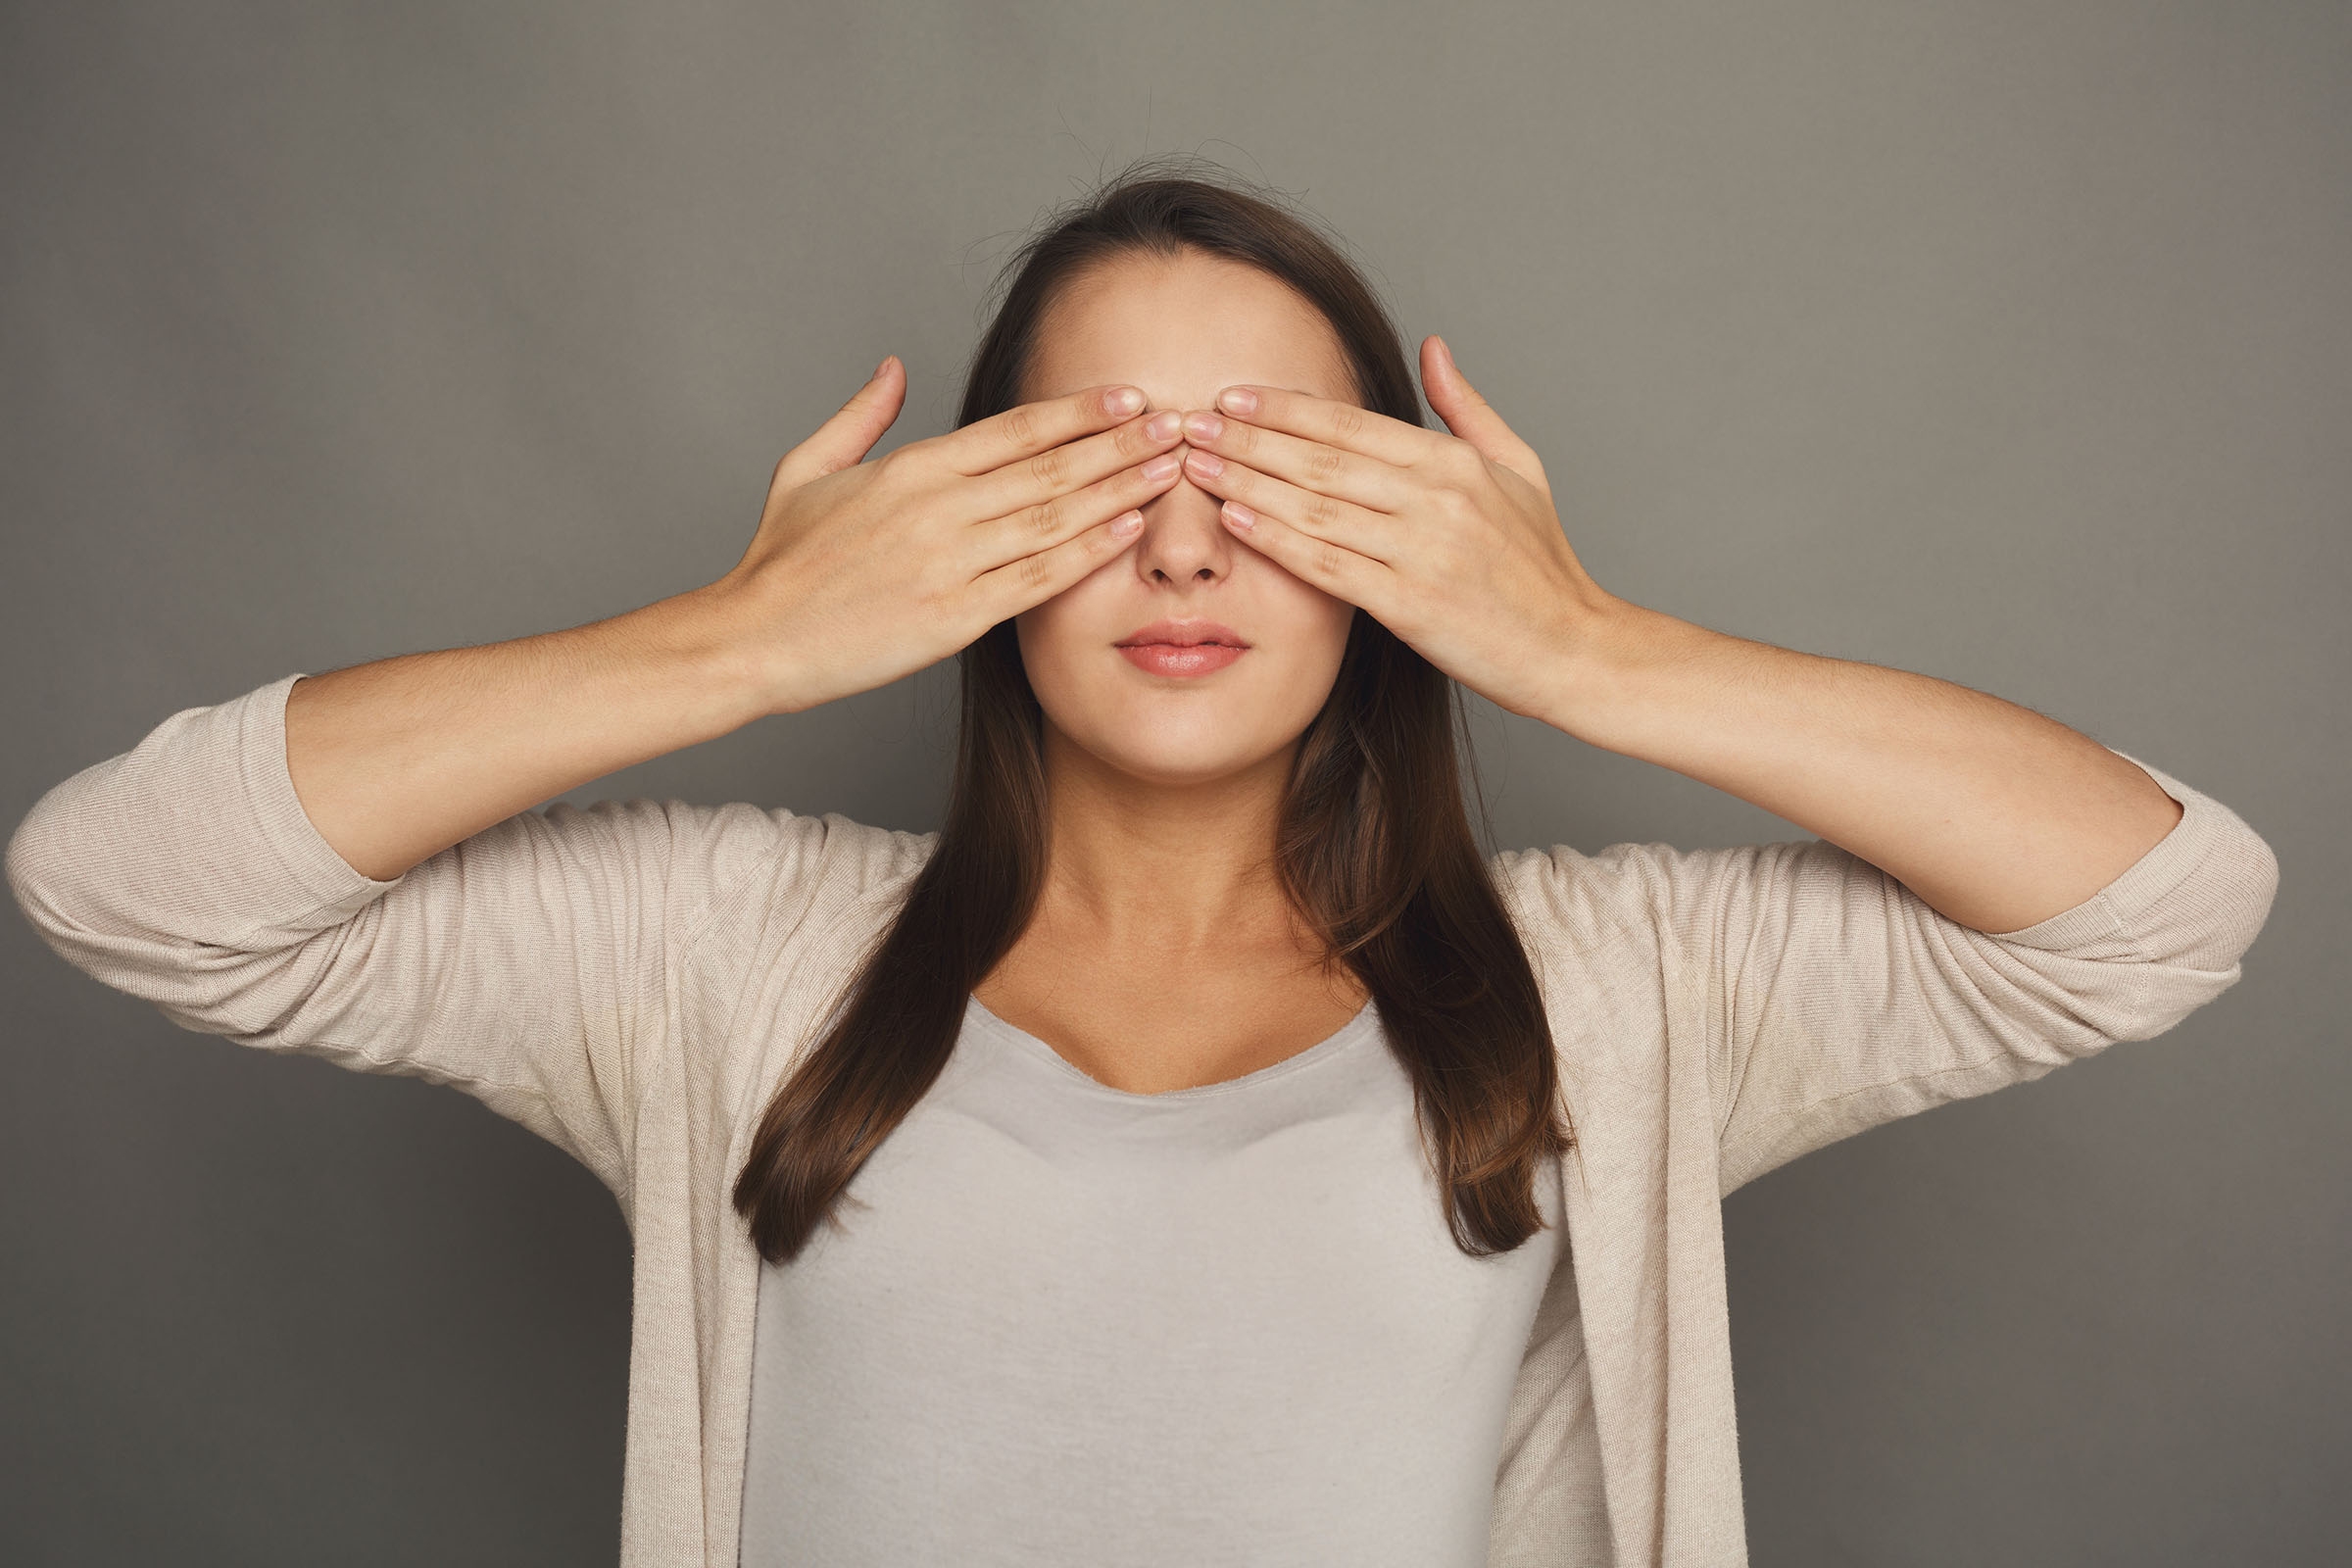 See no evil concept. Portrait of young scared woman covering eyes with hands, gray studio background.